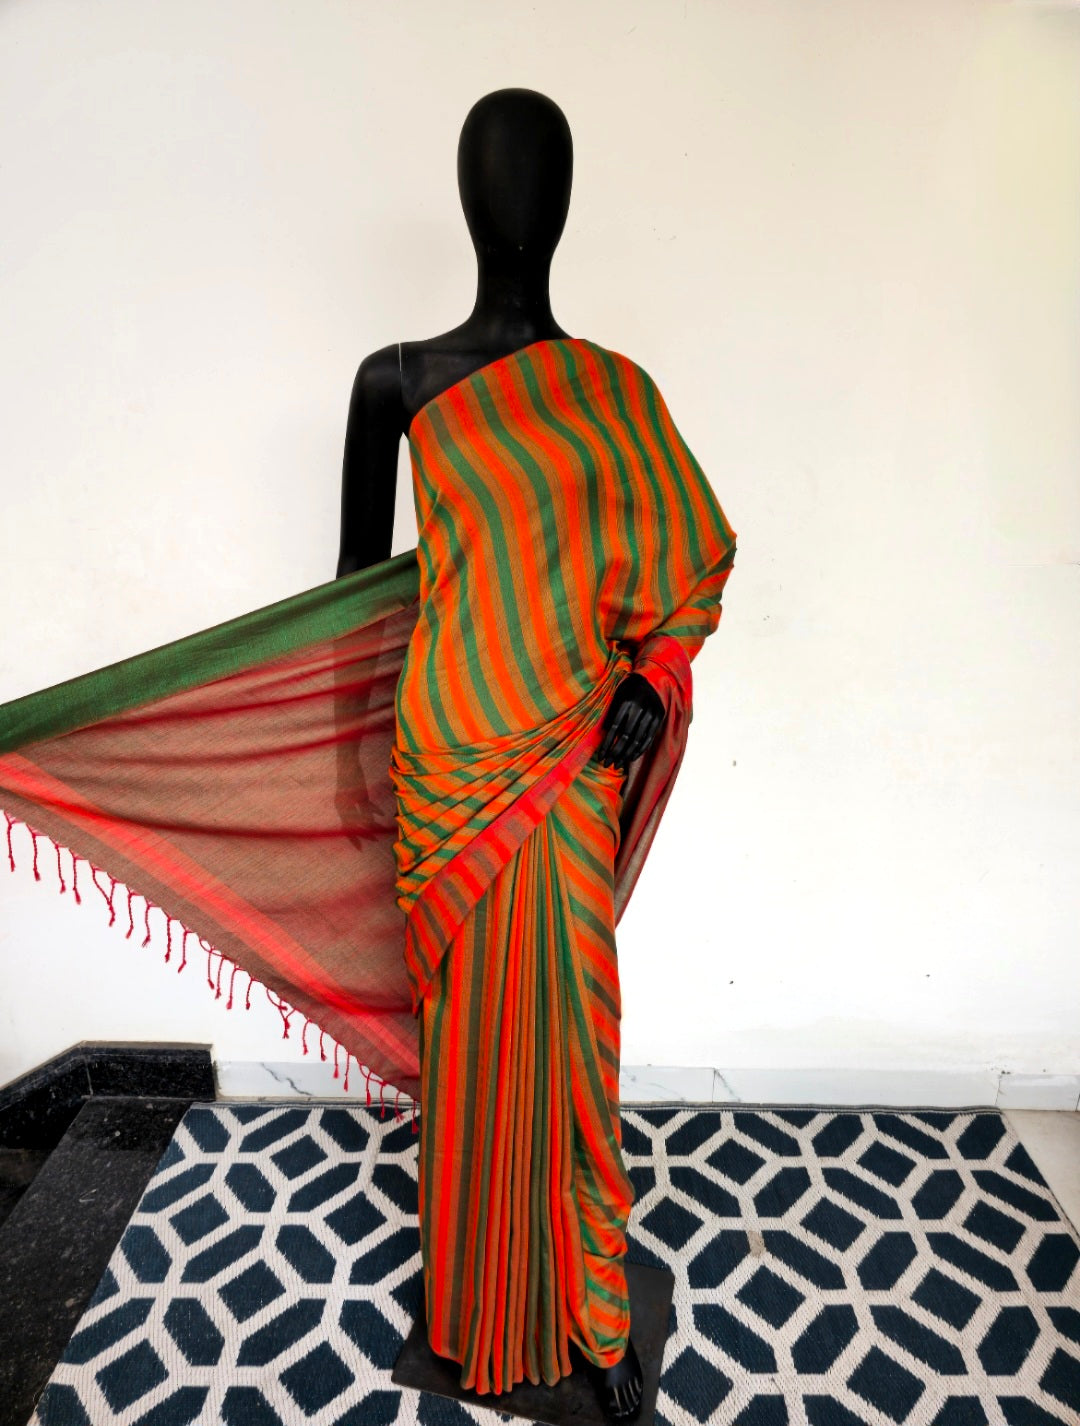 Experience the Art of Reversibility: Green and Orange Pure Cotton Sarees with 4 Pedal Craftsmanship